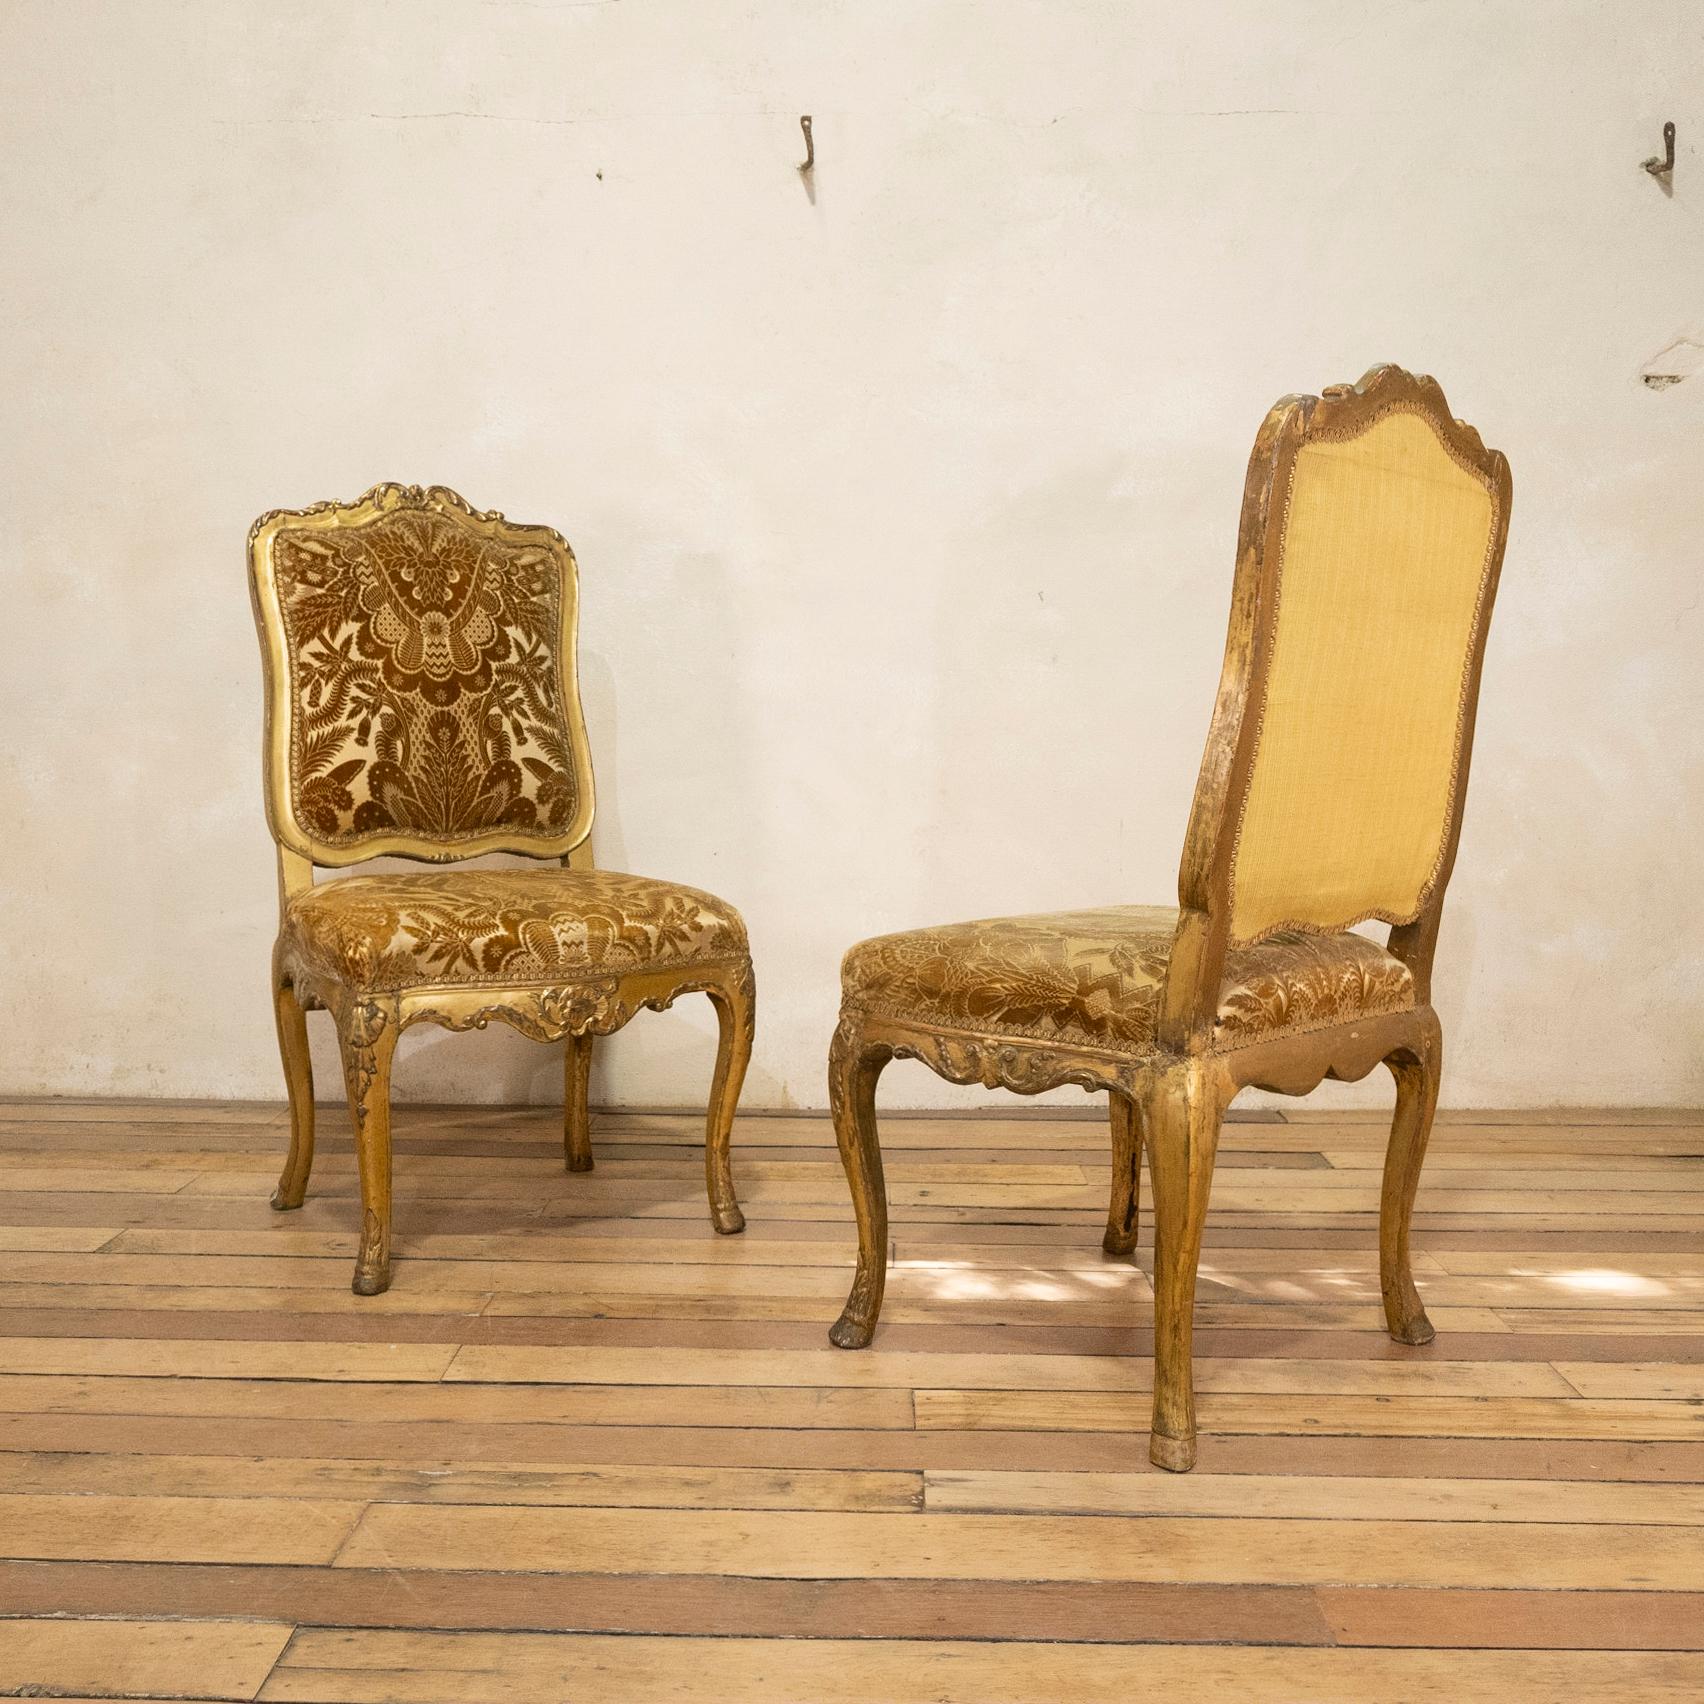 A pair of early 18th century Louis XV chairs. Displaying carved walnut giltwood frames that have worn beautifully over the years - featuring shaped padded backs and seats within foliate carved frames and shell decoration throught. 

Upholstered in